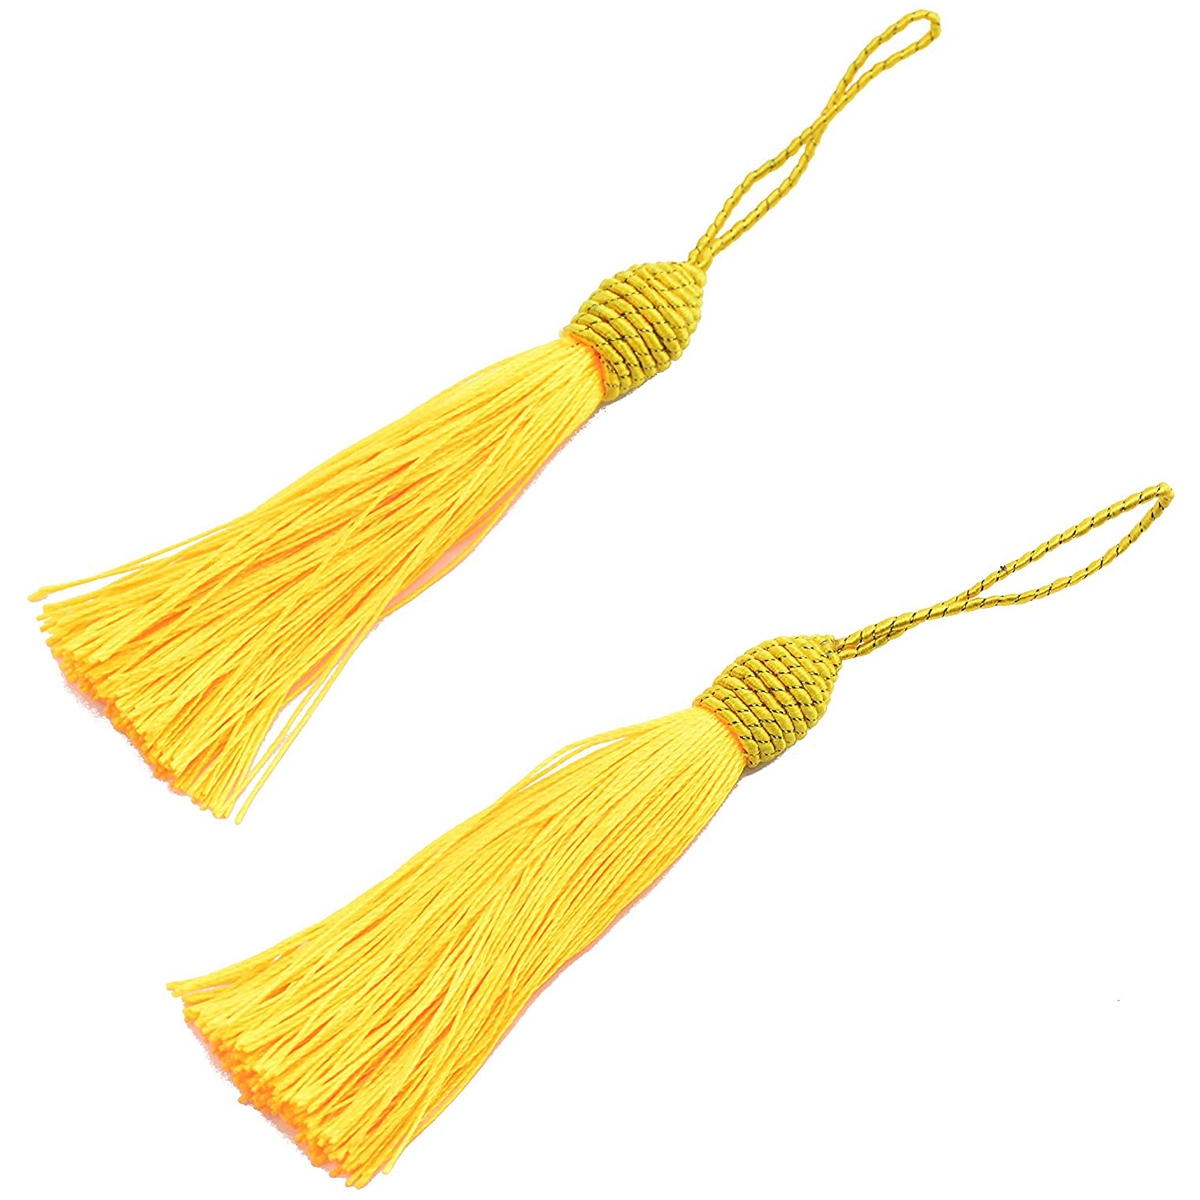 6 Inch Silky Floss Bookmark Tassels with 2-Inch Cord Loop and Small  royal gold color nice quality